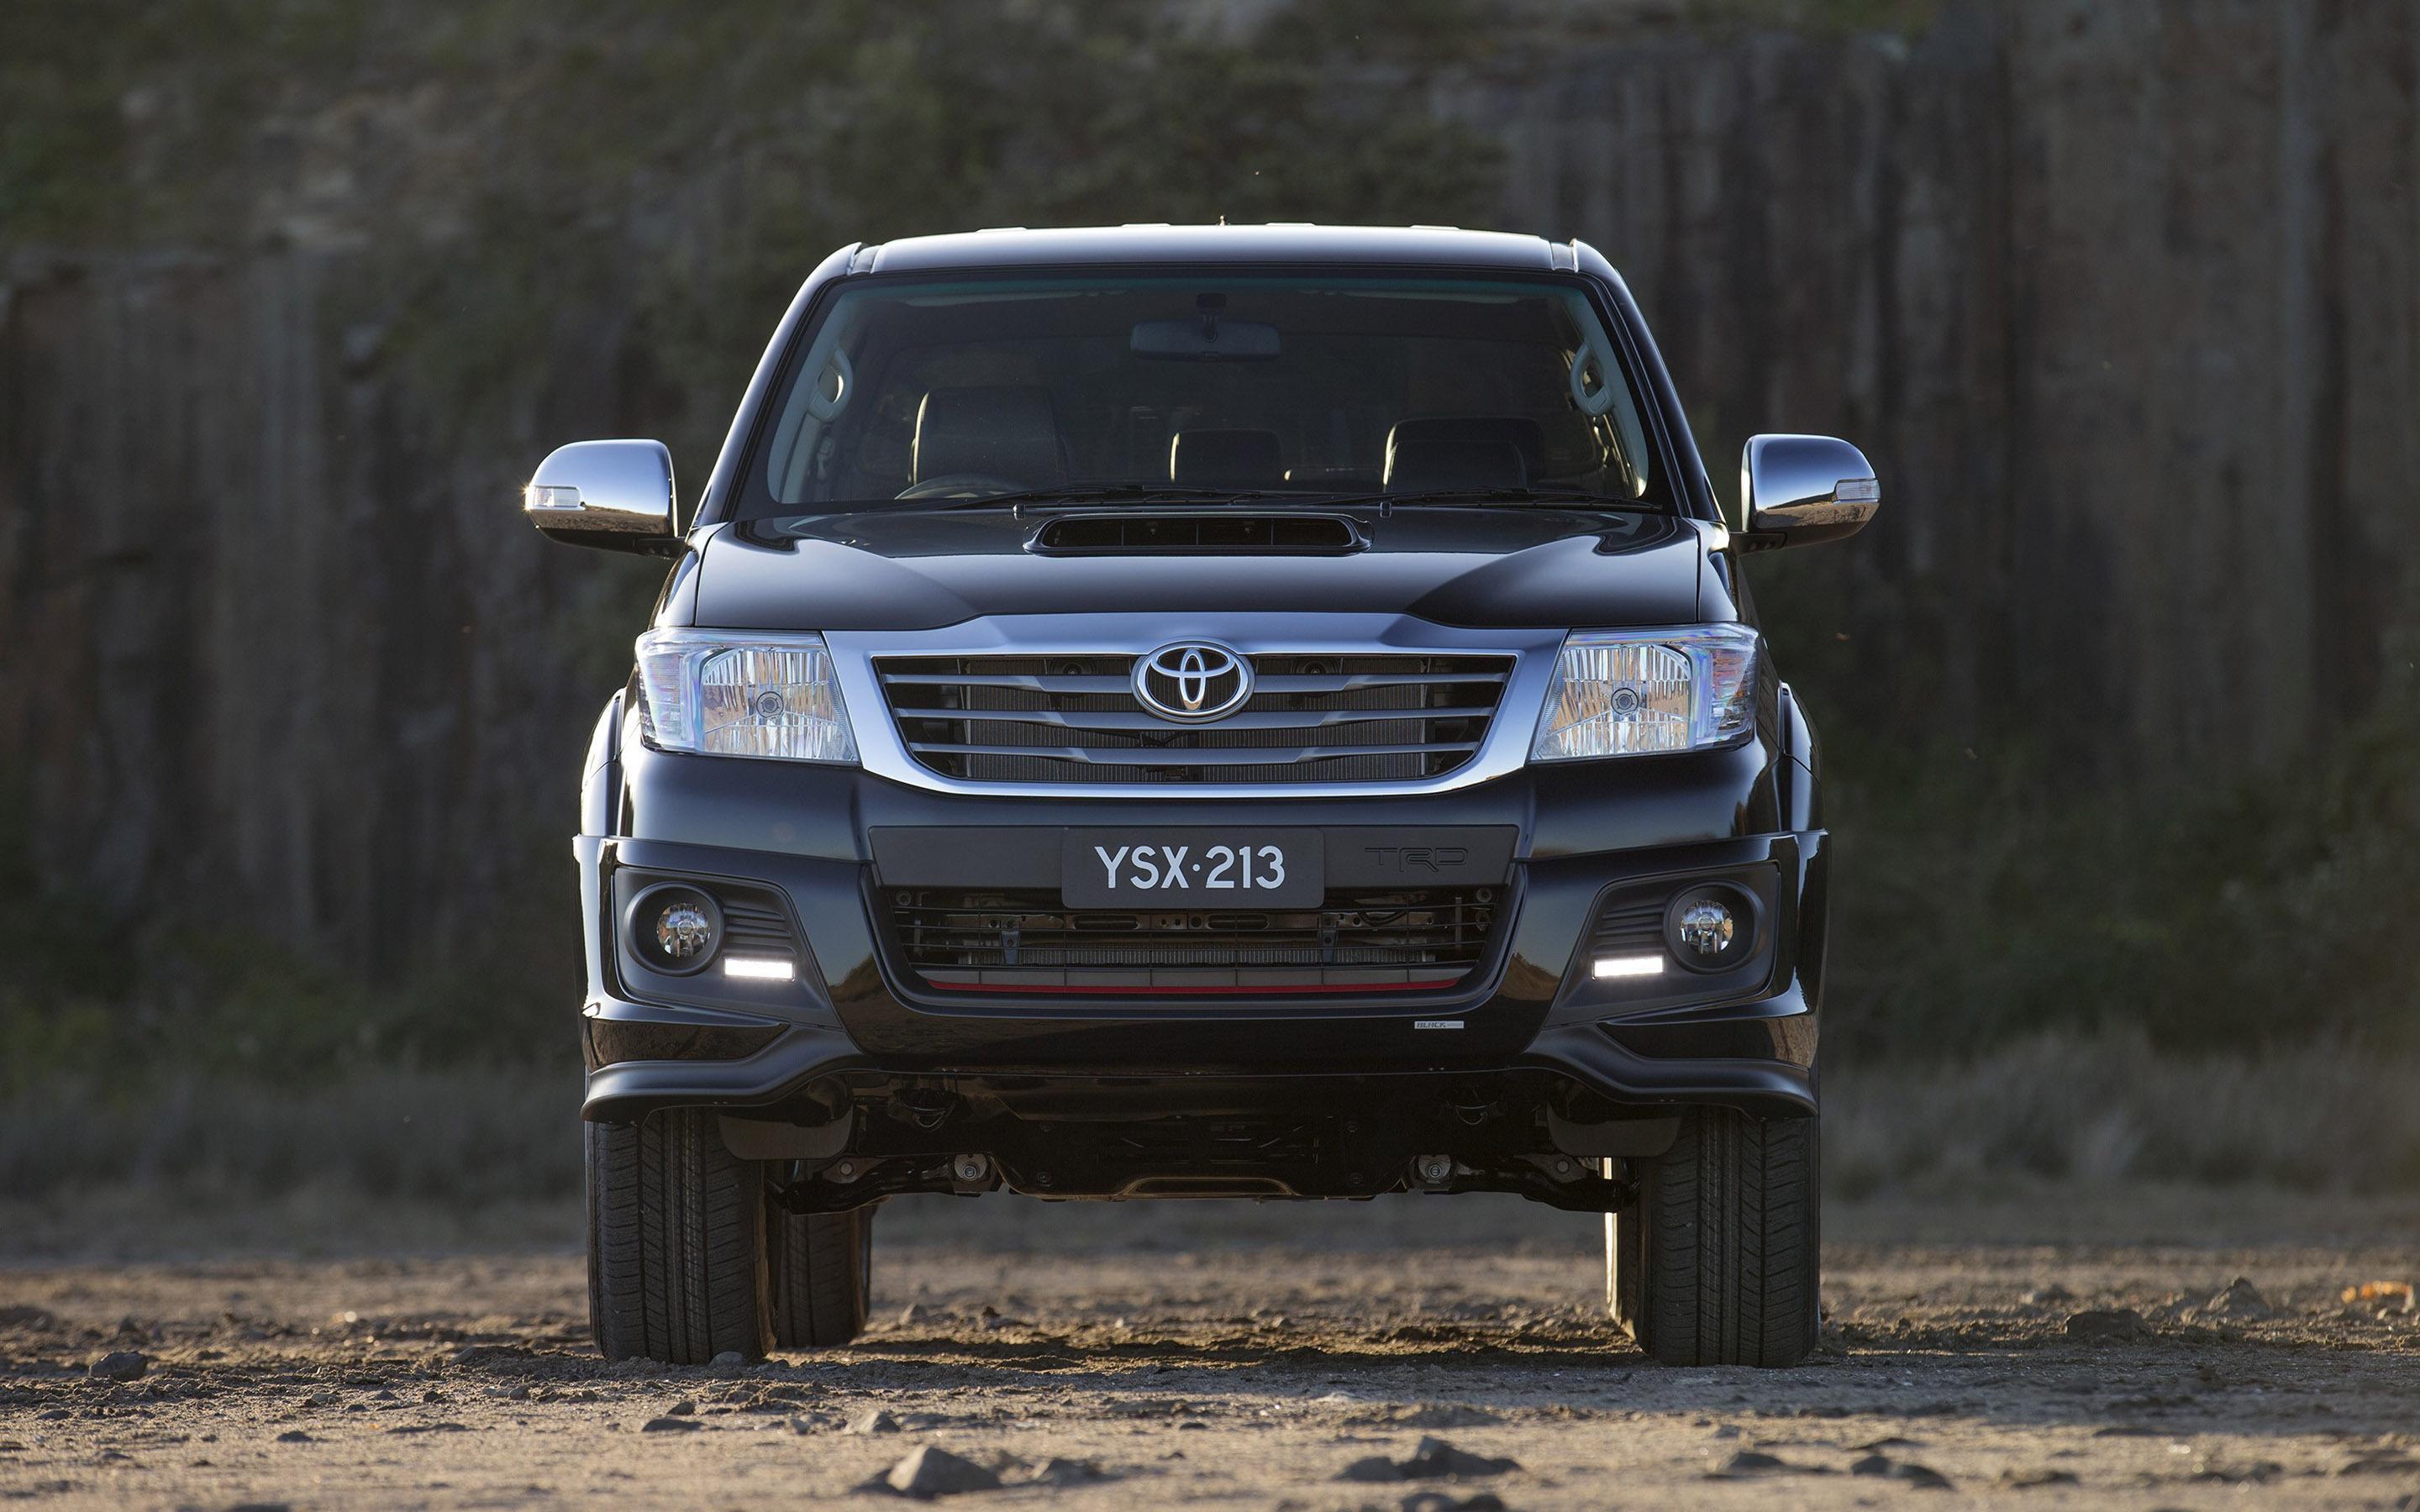 HD Toyota Hilux front view Wallpaper